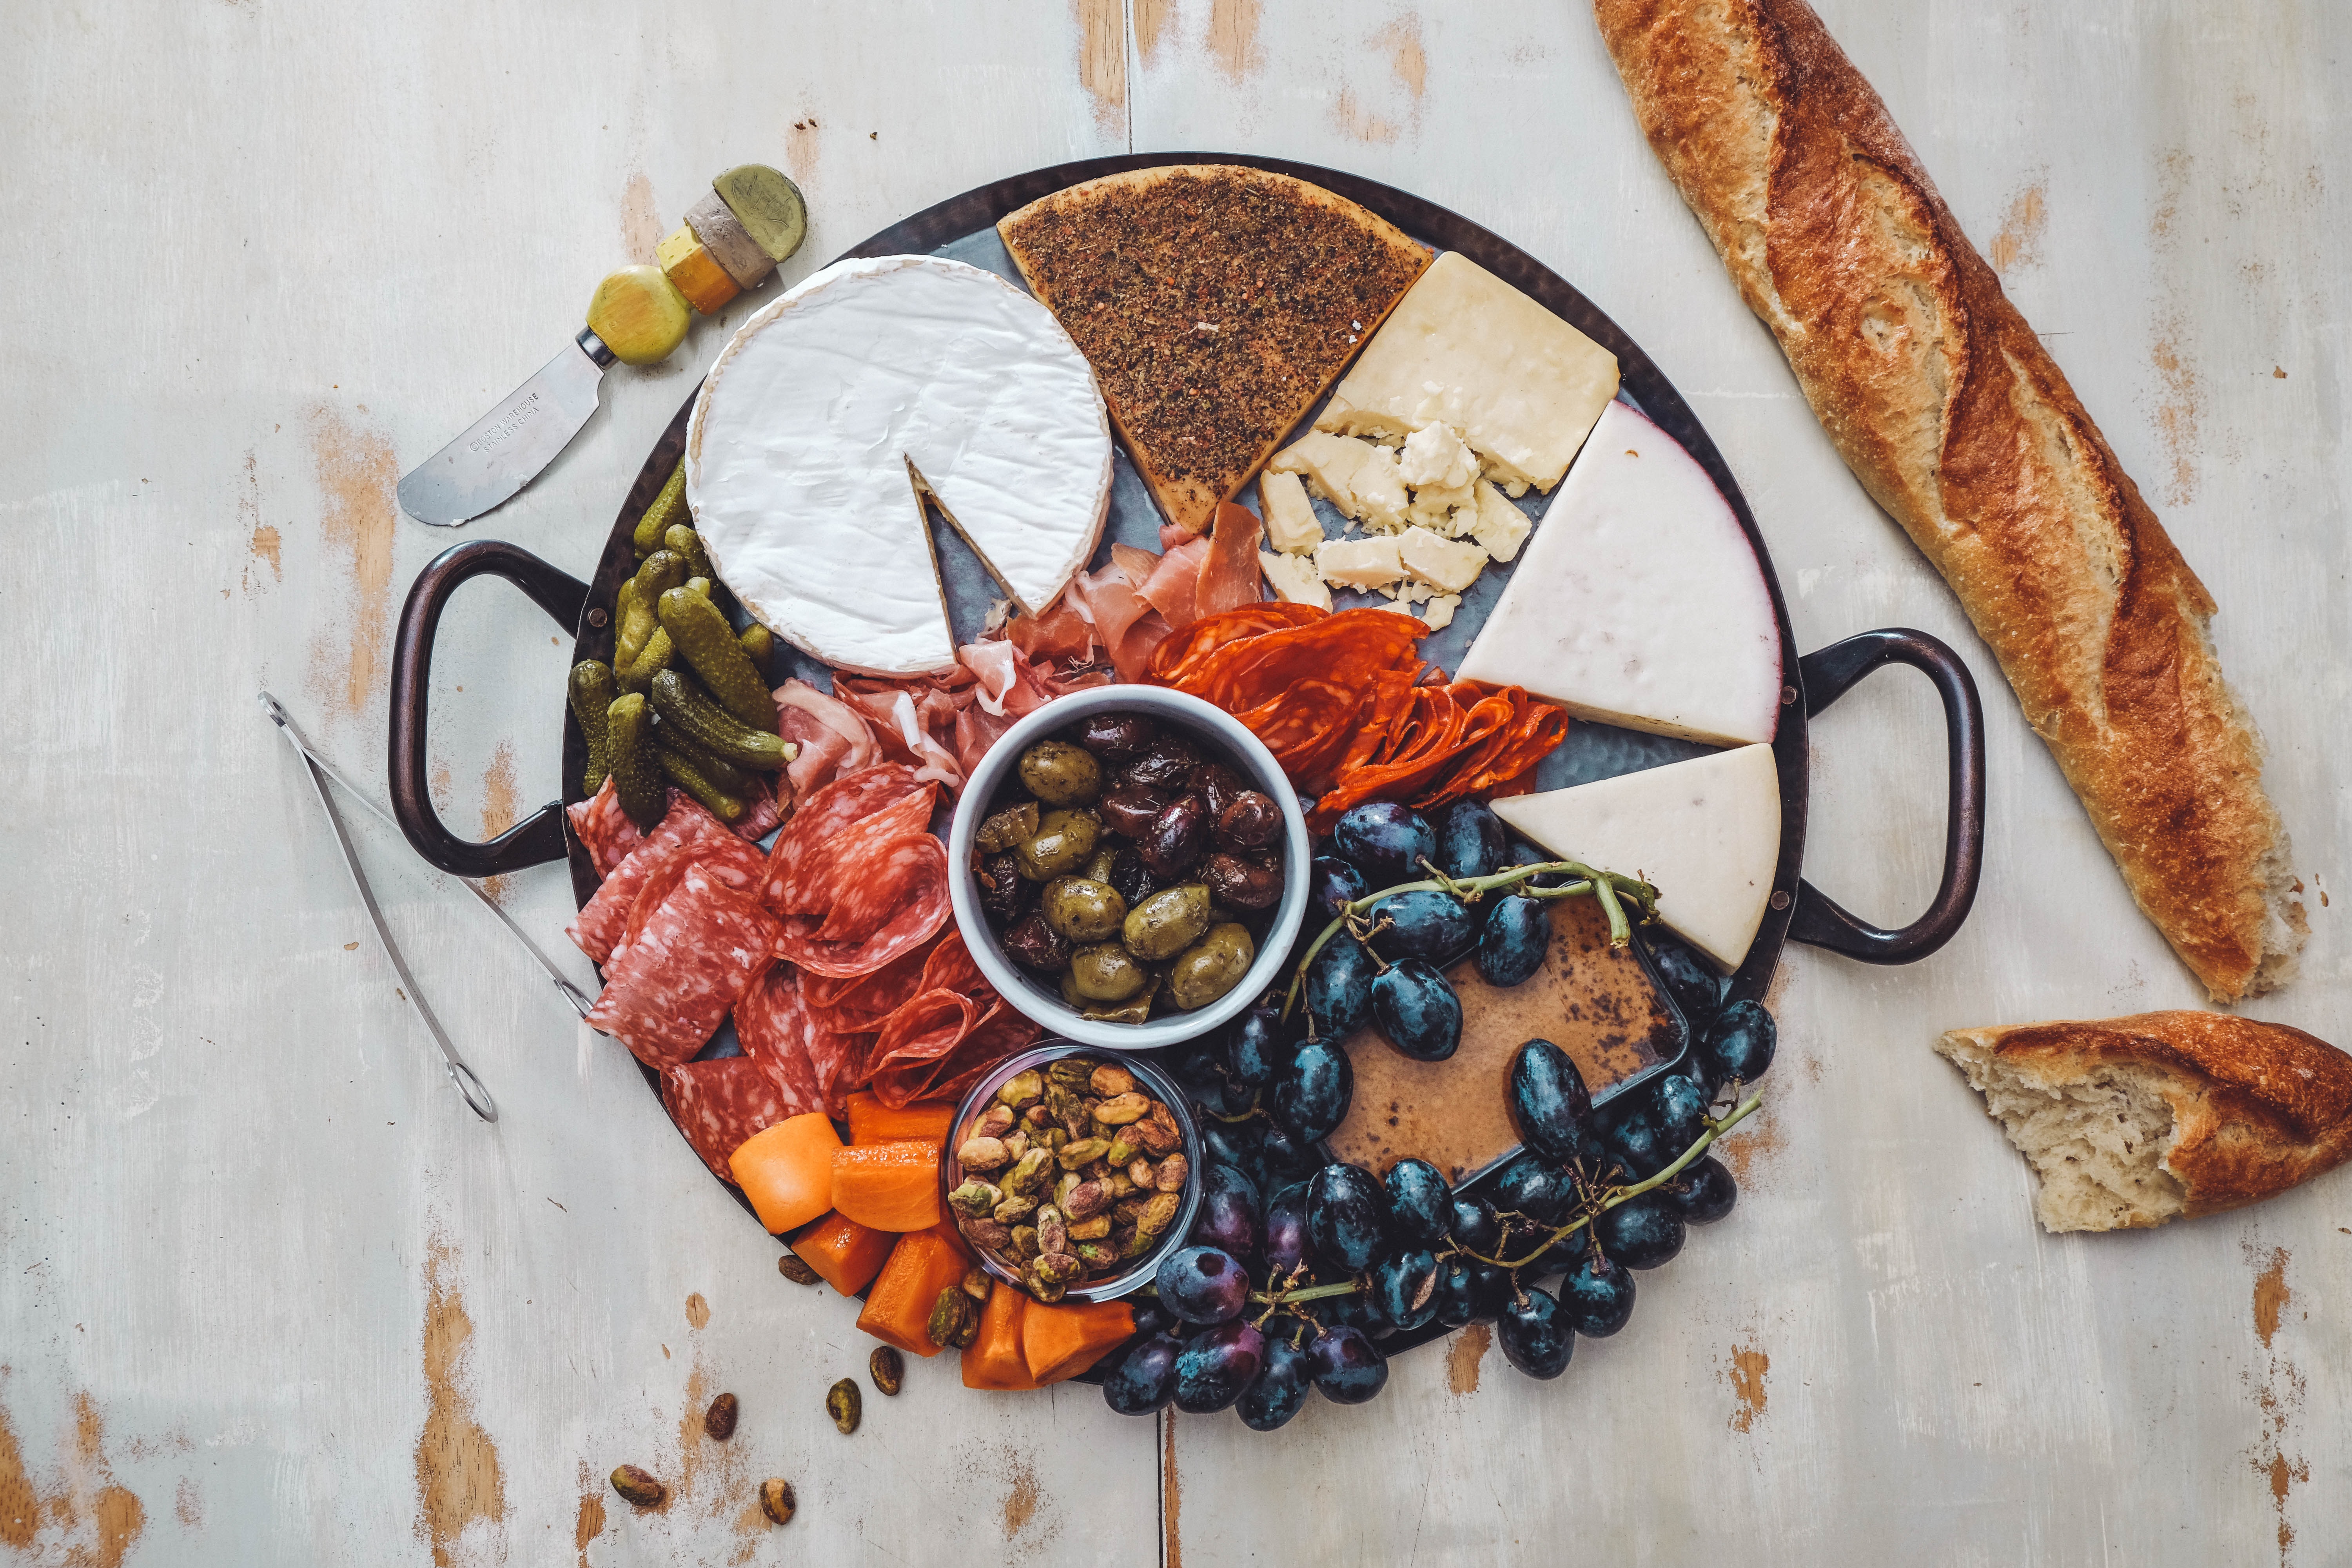 Food Pickles Bread Fruit Cheese Olives Pistachios Grapes Brie Still Life Salami Knife 6000x4000